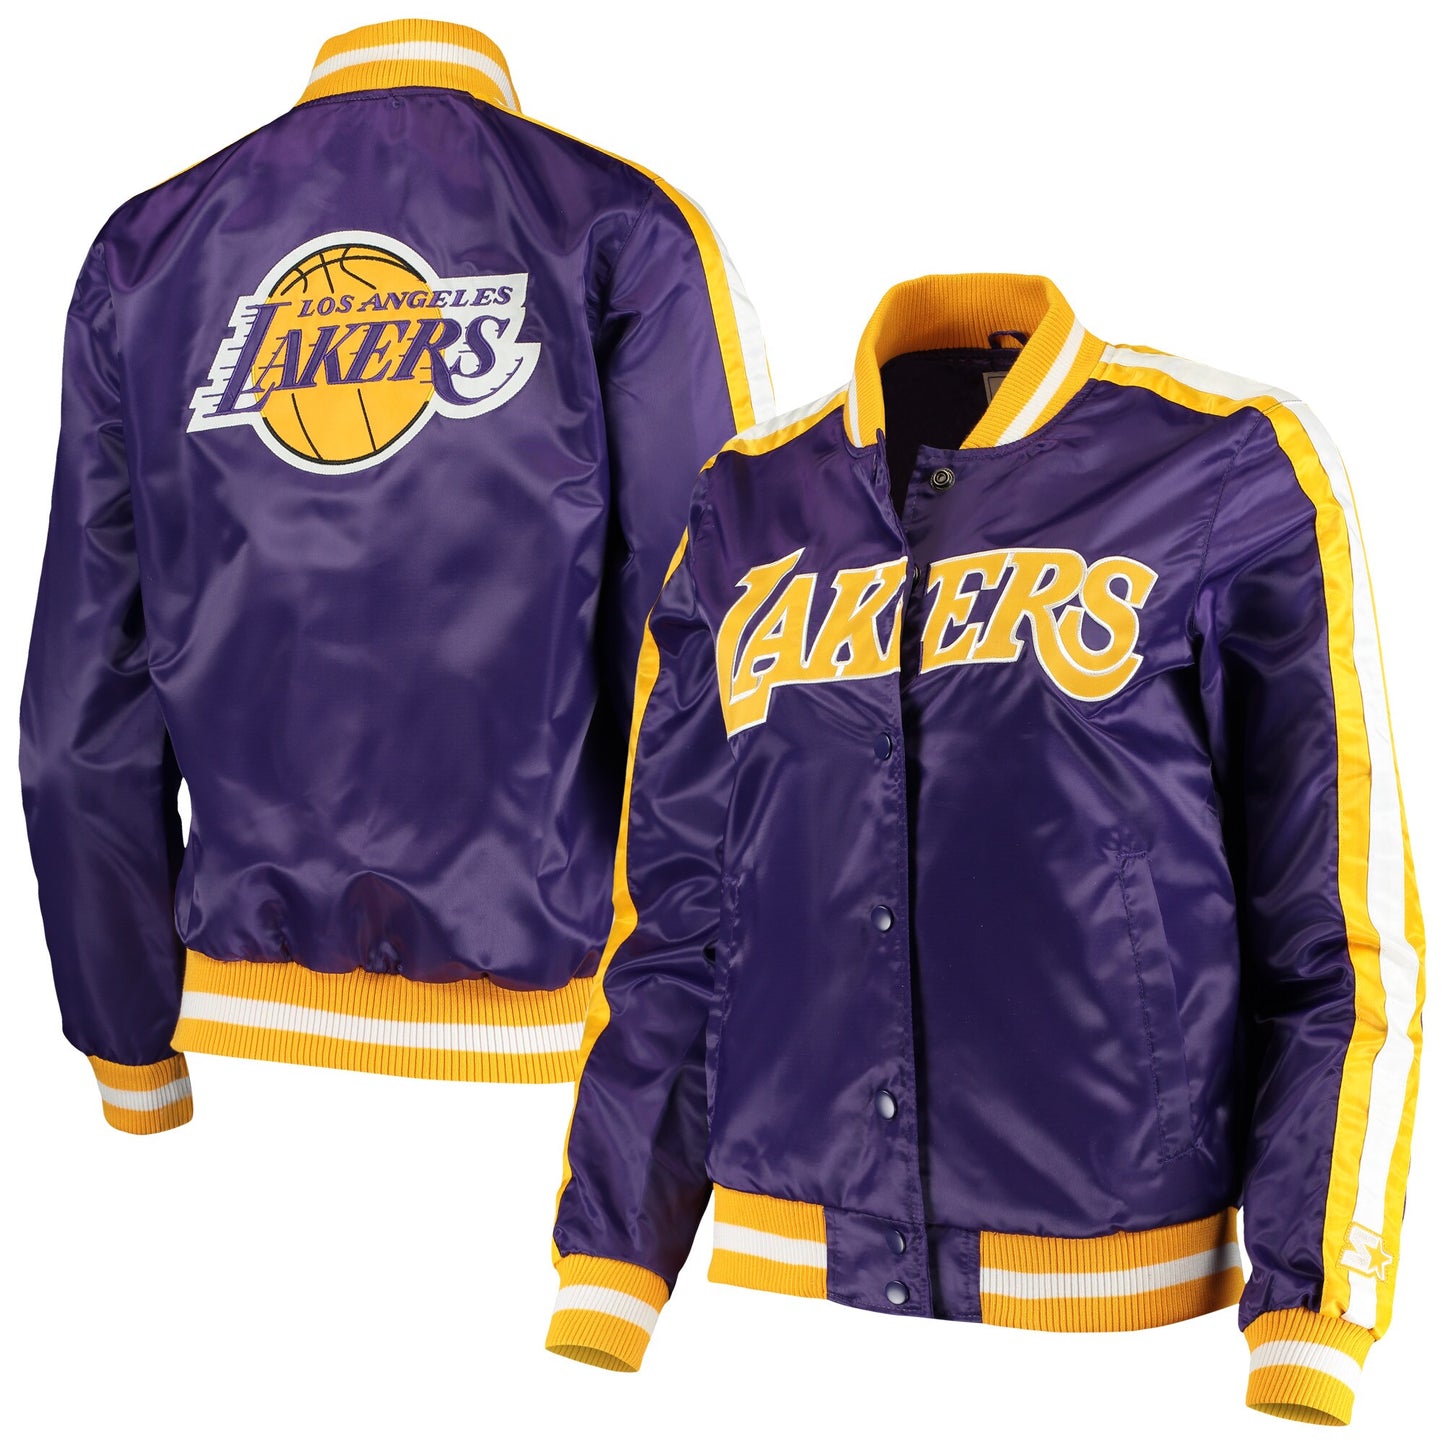 LOS ANGELES LAKERS WOMEN'S  COMPETITION JACKET